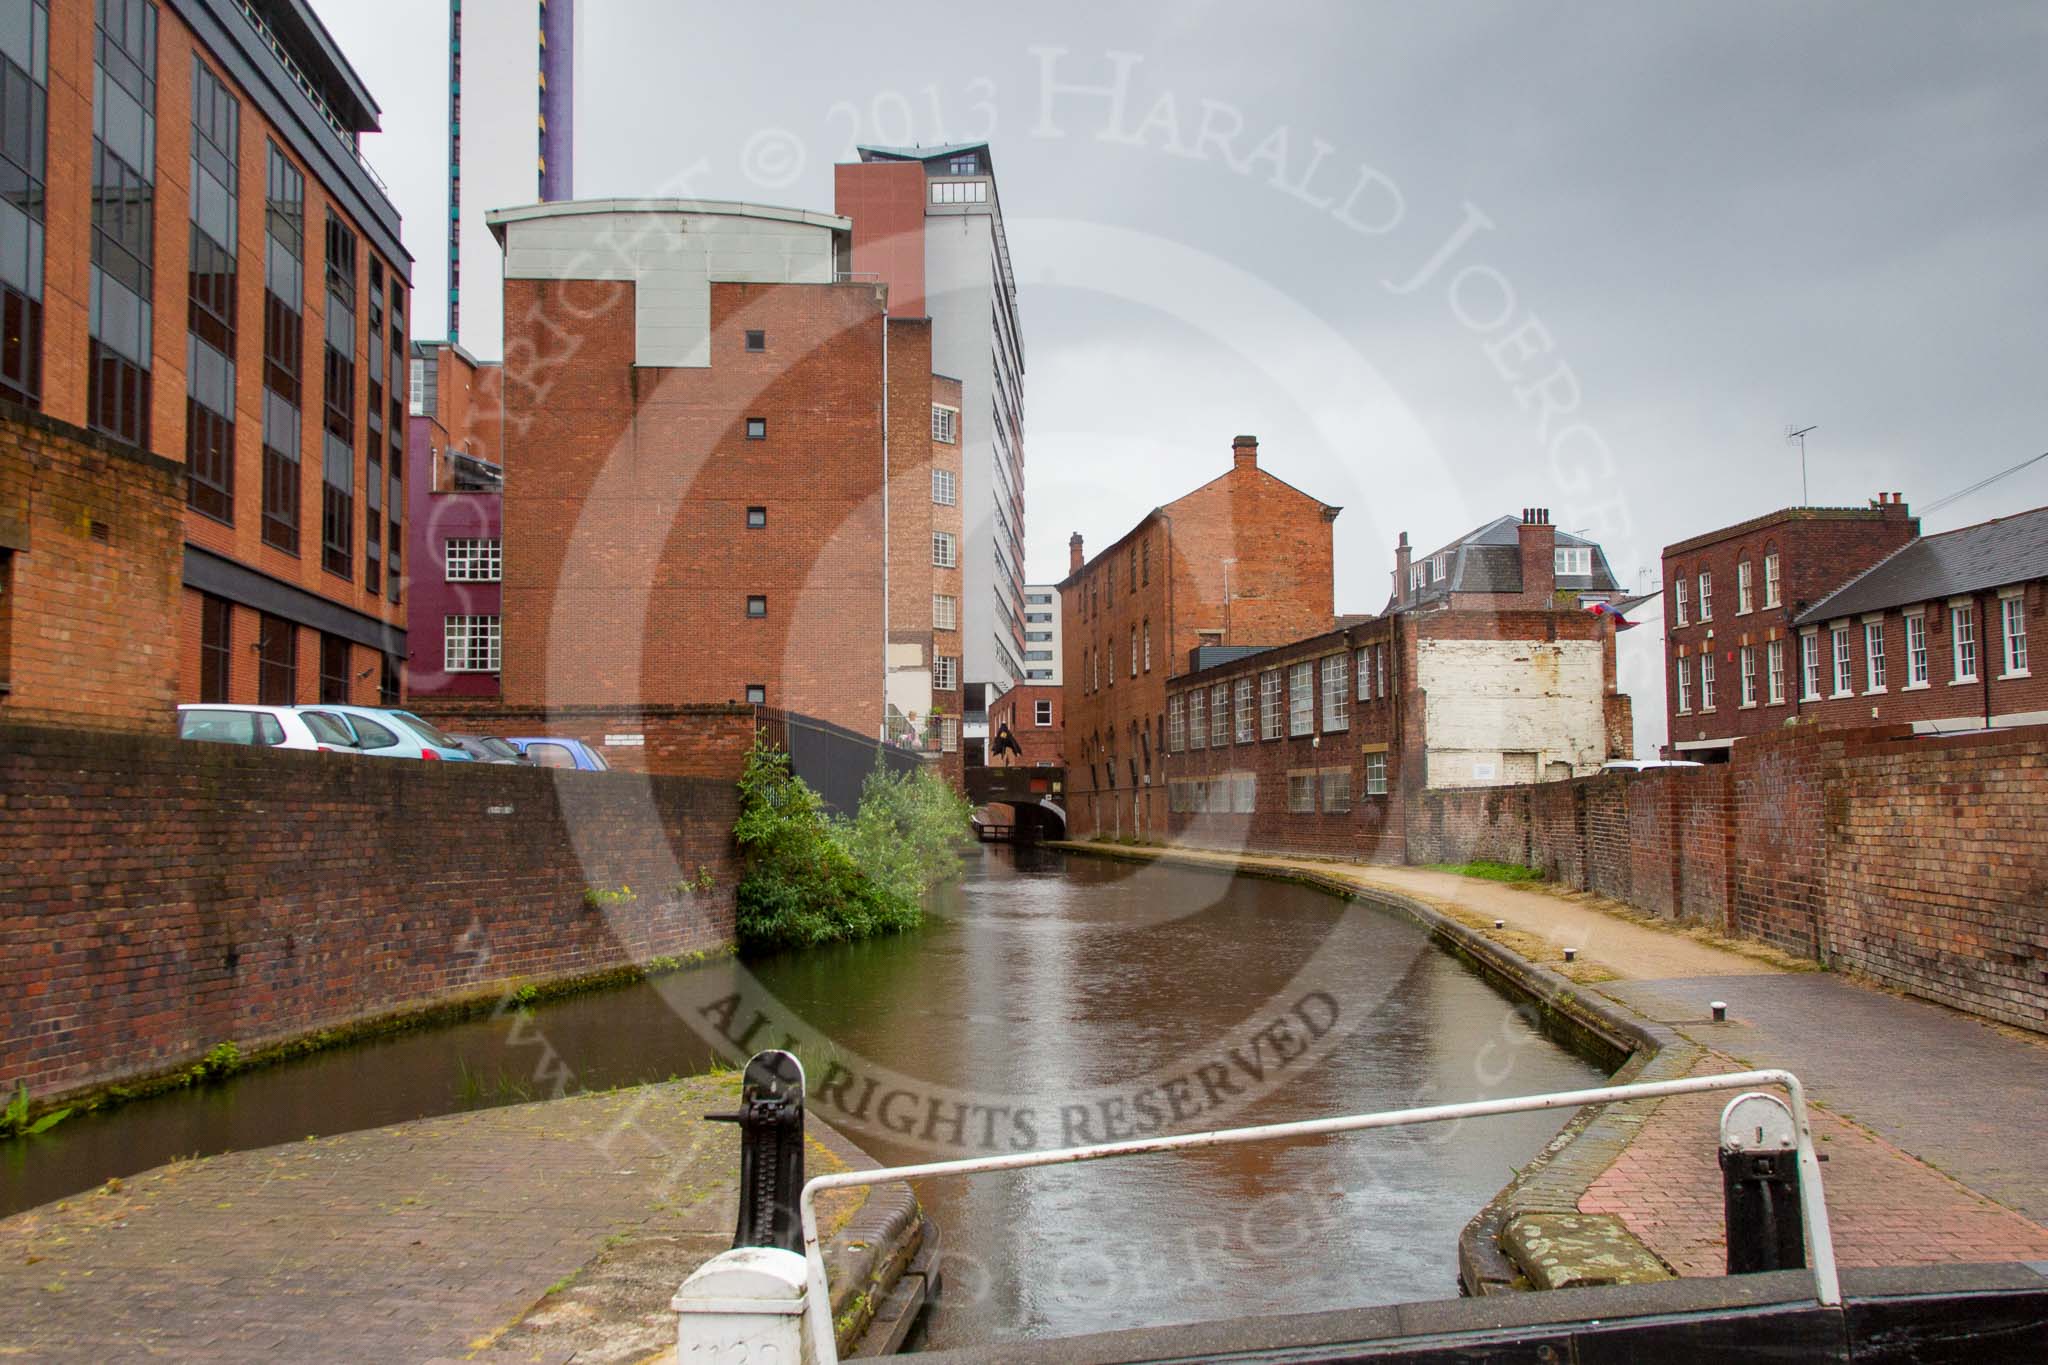 BCN Marathon Challenge 2014: The Birmingham & Fazeley Canal between  Ludgate Hill Brudge and Livery Street Bridge, with old canalside architecture on the right, and modern developments on the right..
Birmingham Canal Navigation,


United Kingdom,
on 23 May 2014 at 15:00, image #35